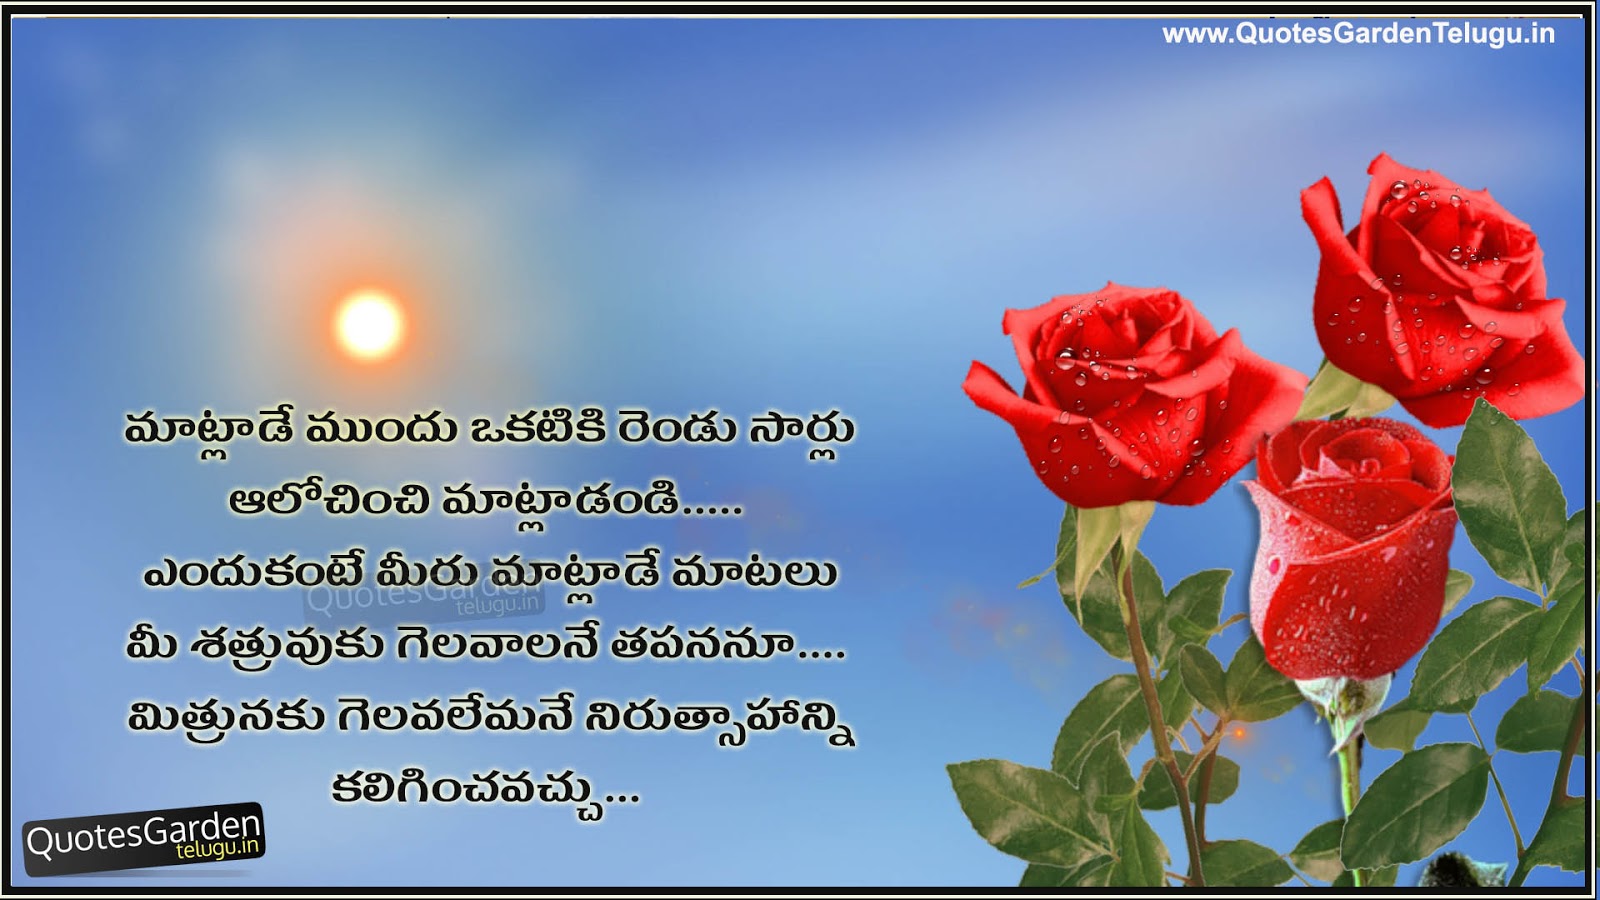 Good morning Telugu Quotes nice lines about life | QUOTES GARDEN ...